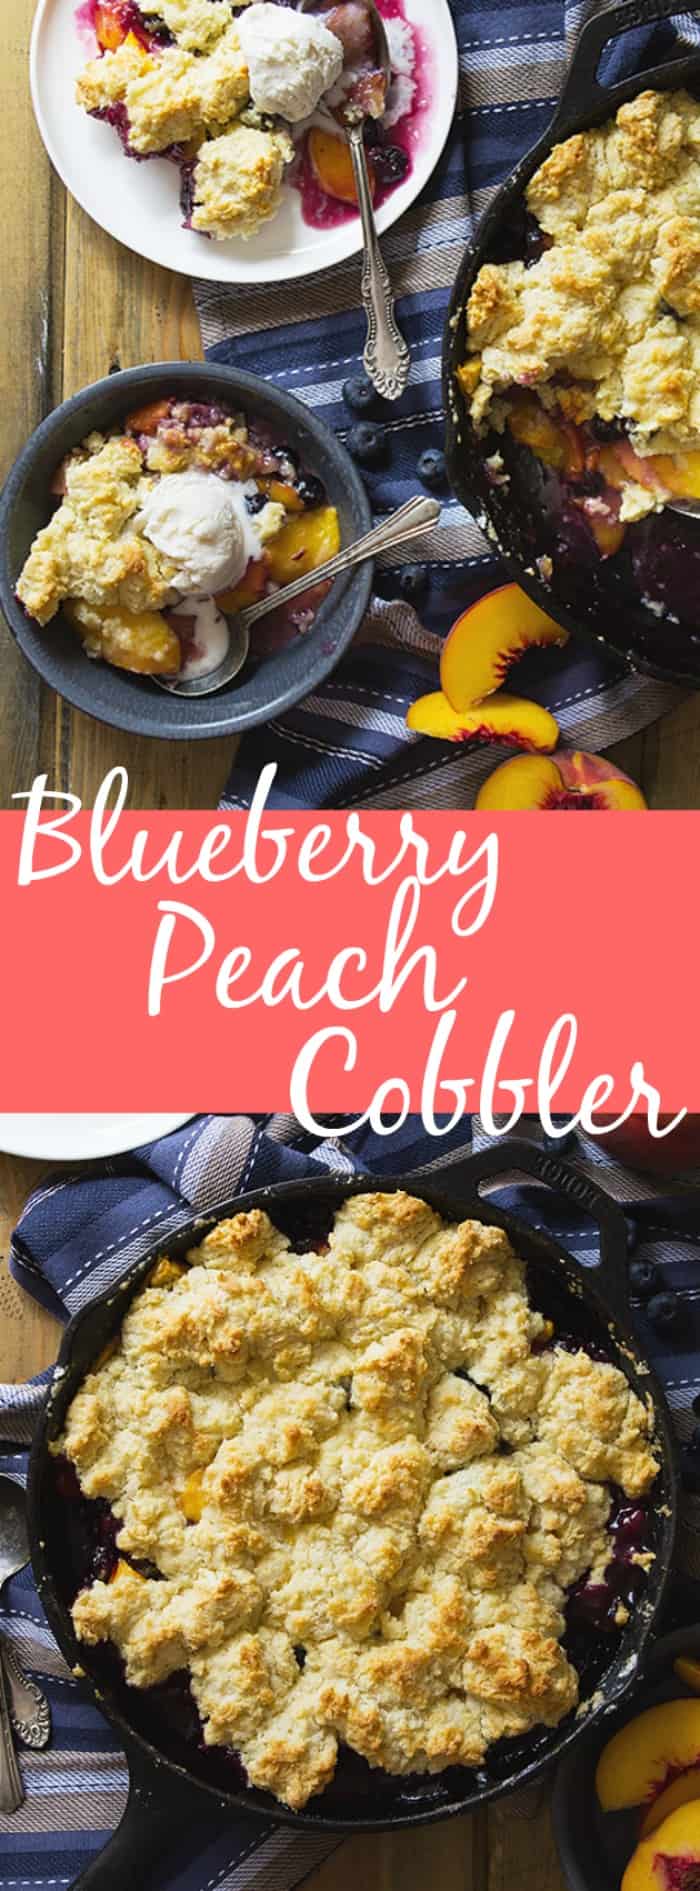 Blueberry Peach Cobbler -an easy recipe made with fresh peaches and blueberries baked beneath a fluffy biscuit topping! | www.countrysidecravings.com